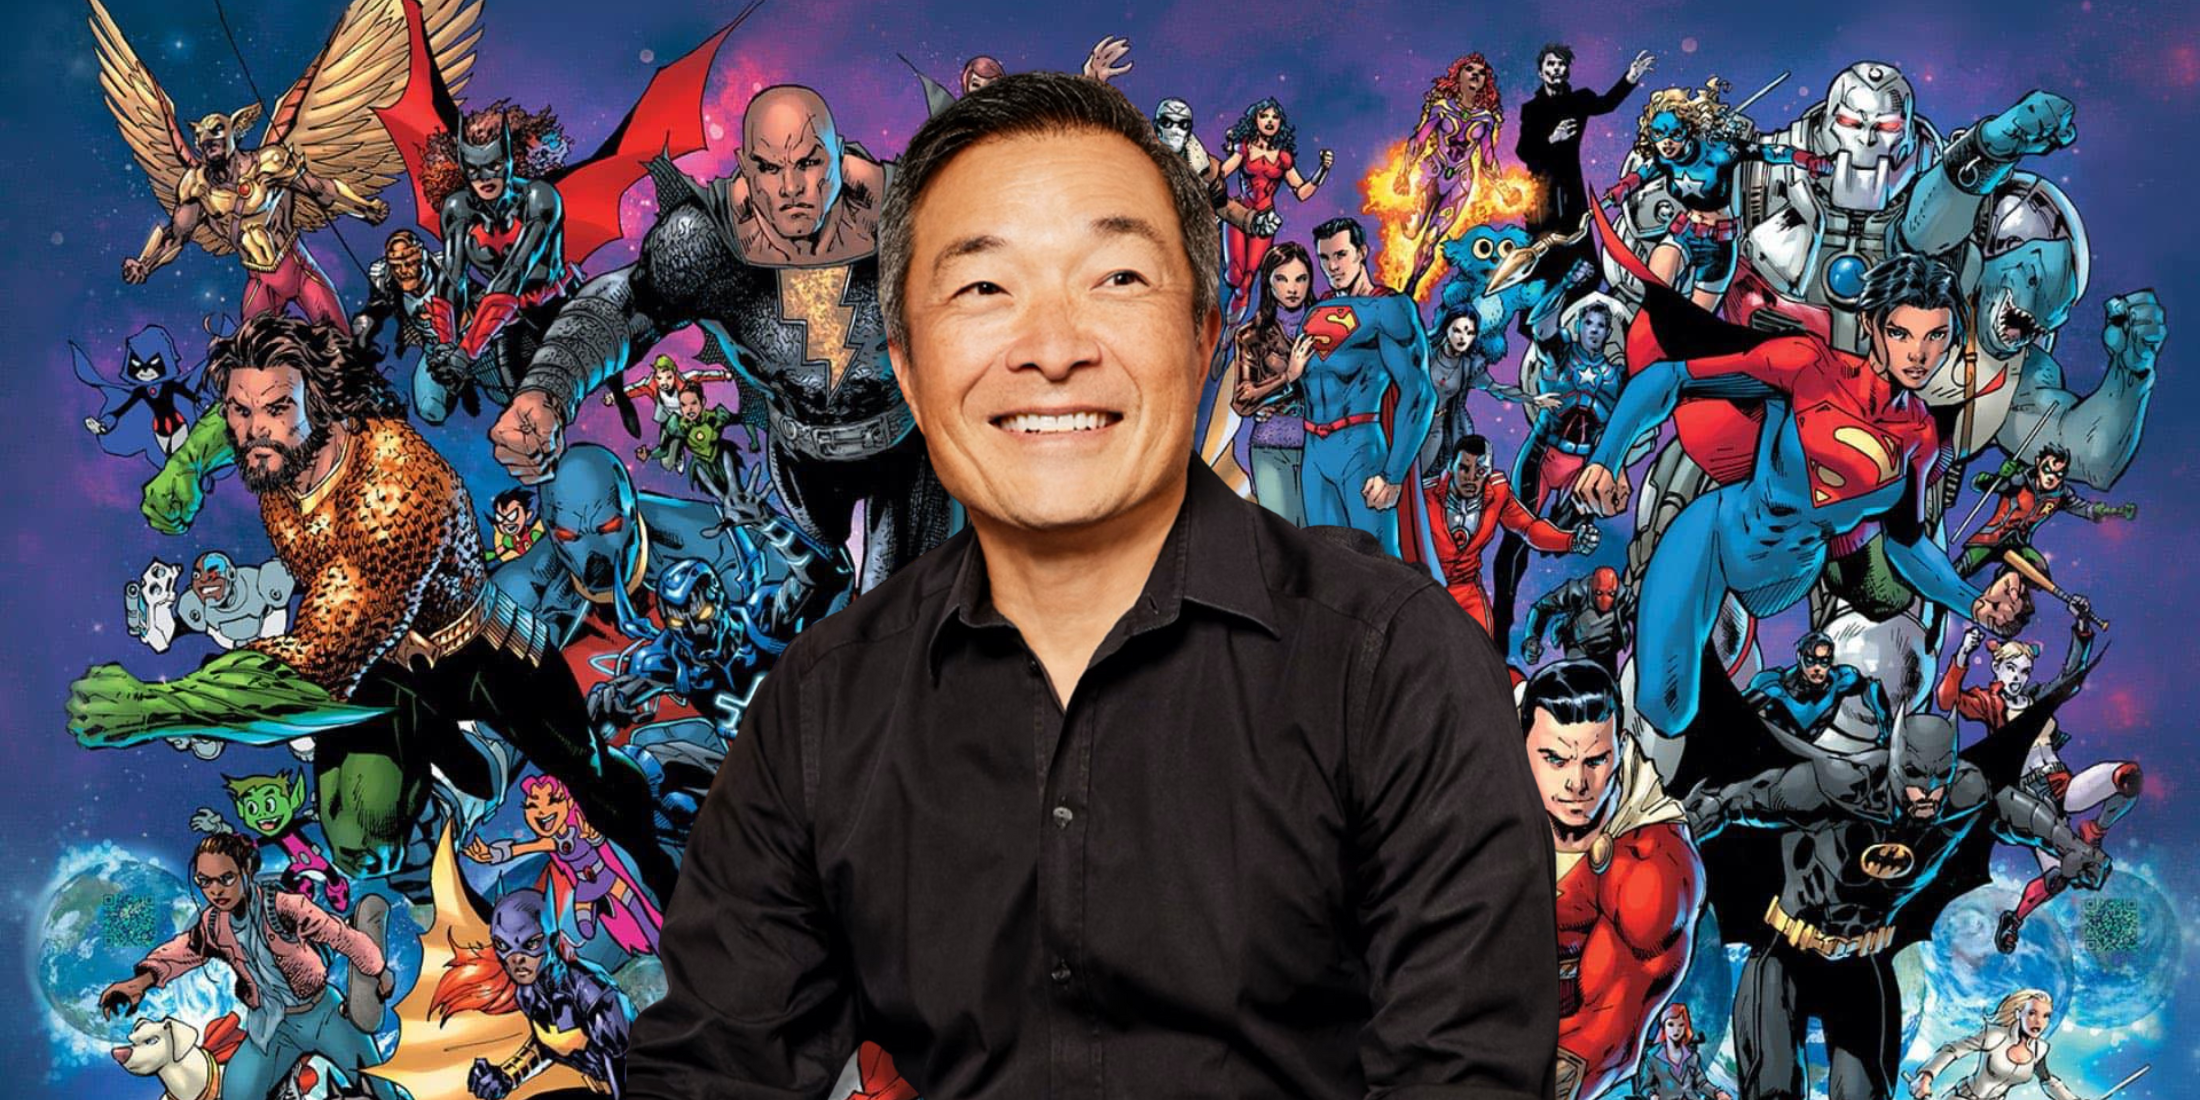 Jim Lee Becomes DC Comics' President, Publisher, and Chief Creative Officer